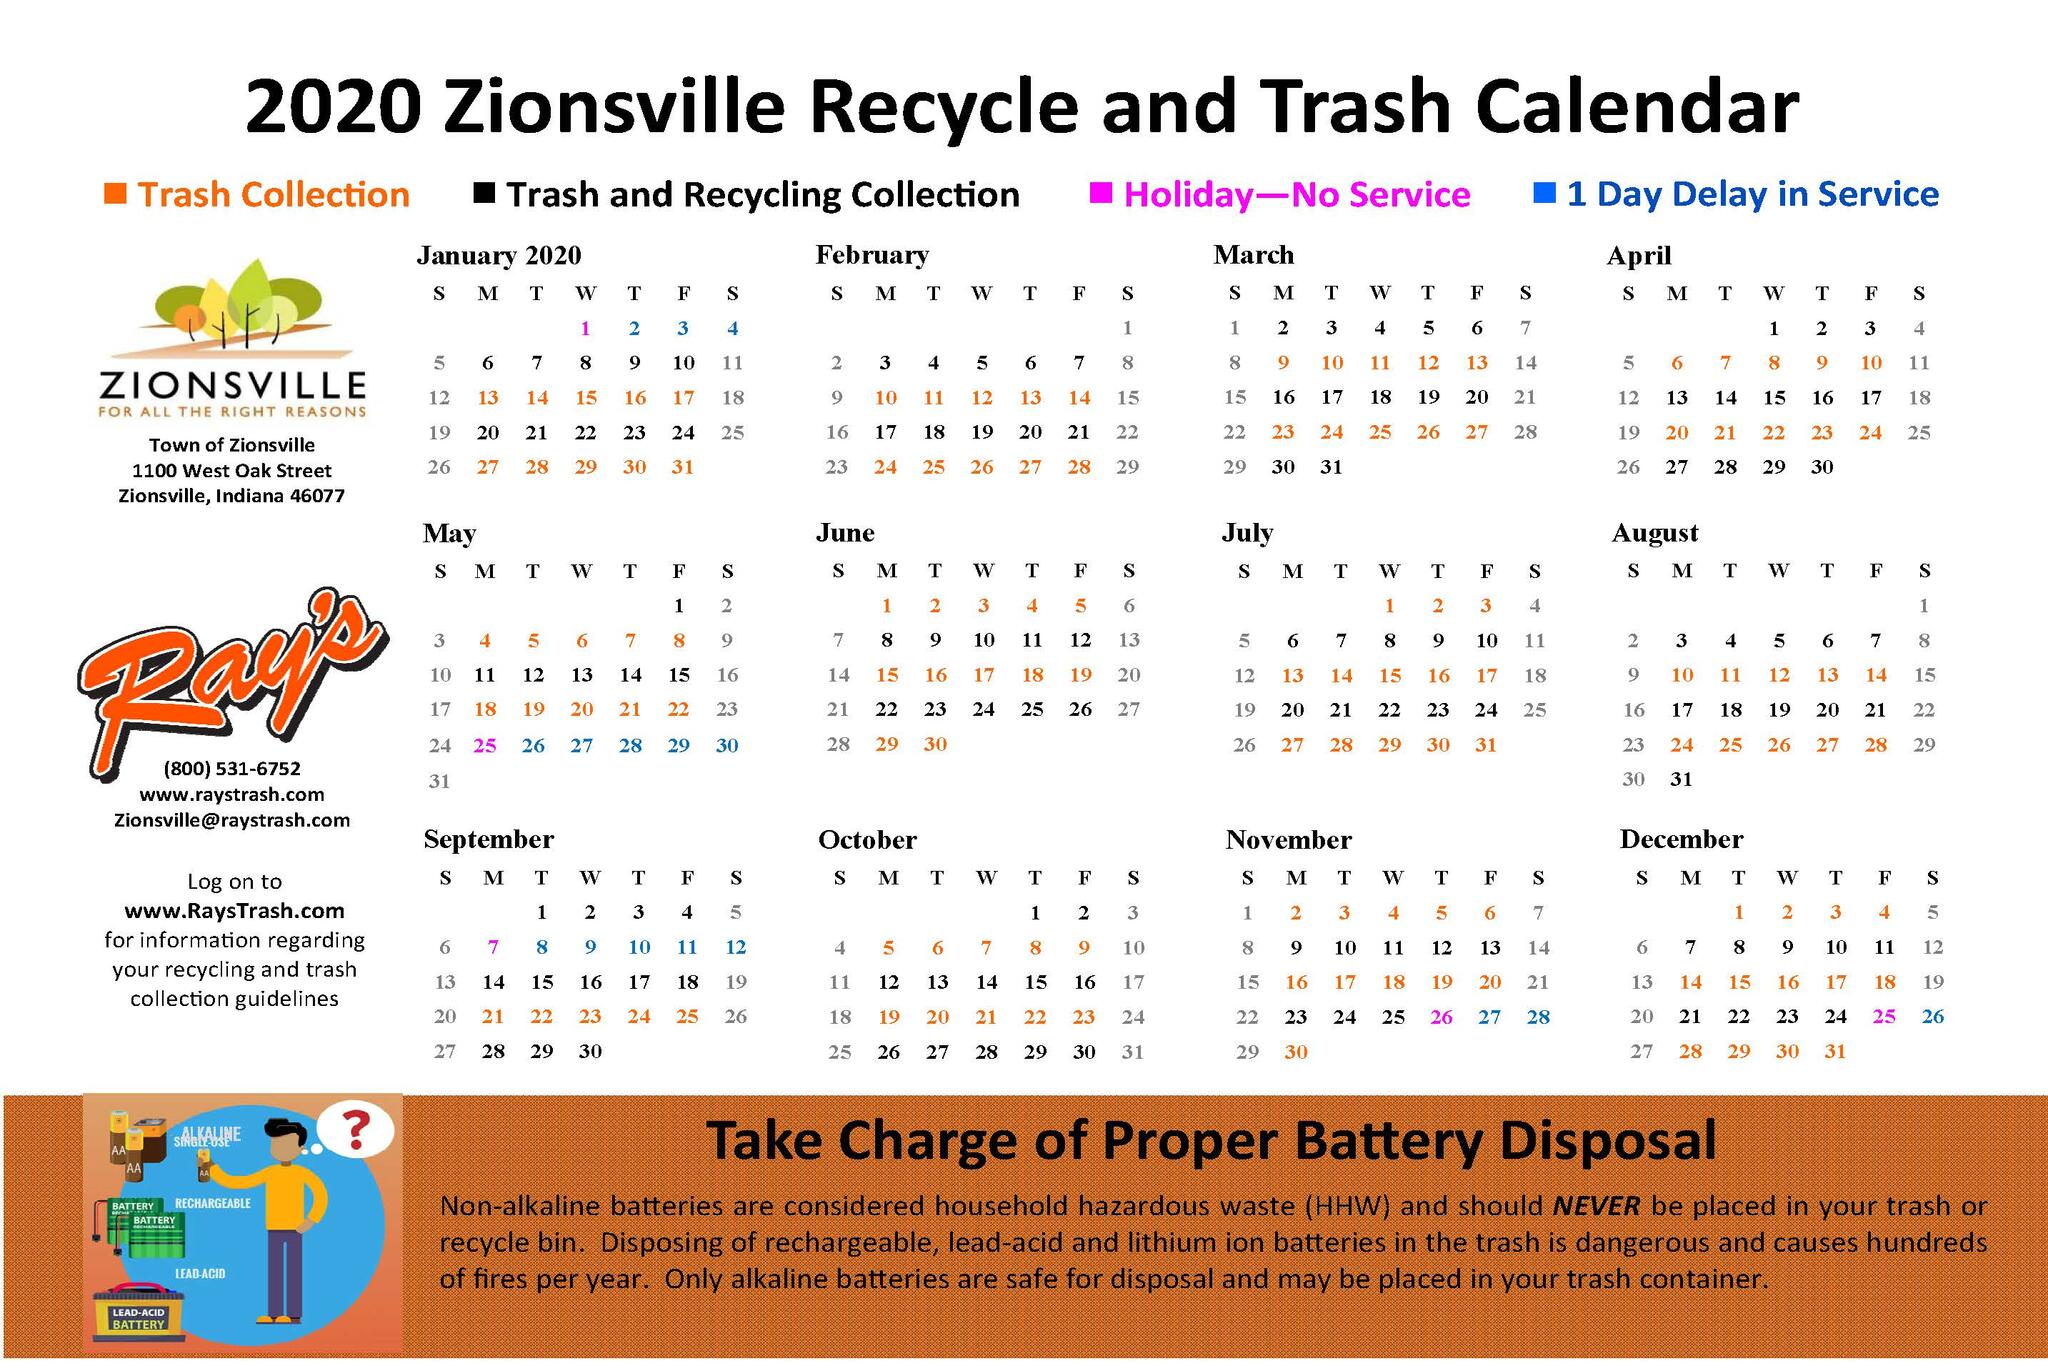 2020 Zionsville recycle and trash schedule (Town of Zionsville